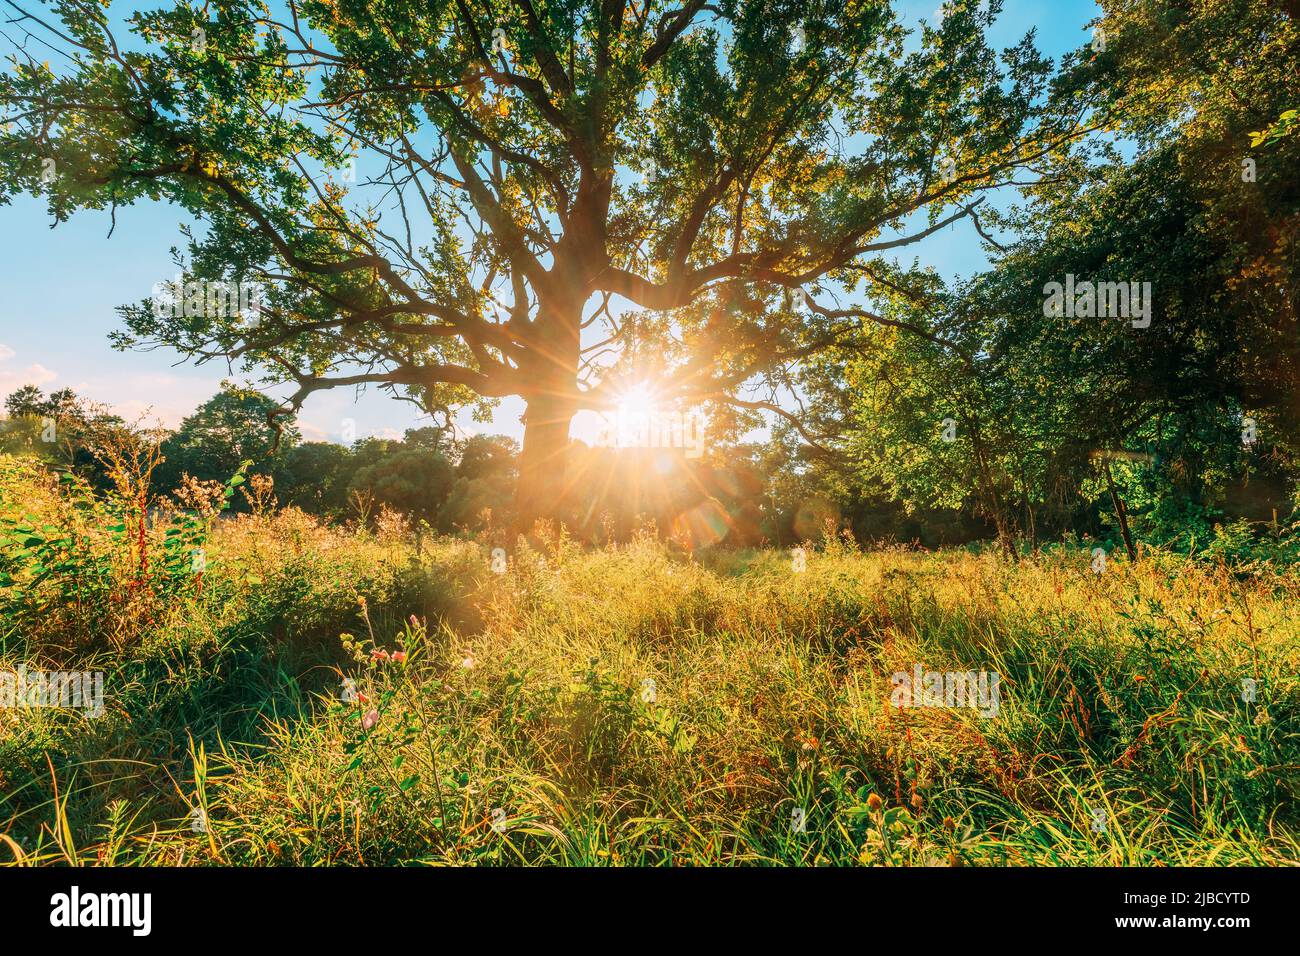 Old wood oak tree in Summer sunny day. Sunlight Sunshine Through Oak Forest Tree. Sunny Nature Wood Sunlight. green greenery lush branches Stock Photo